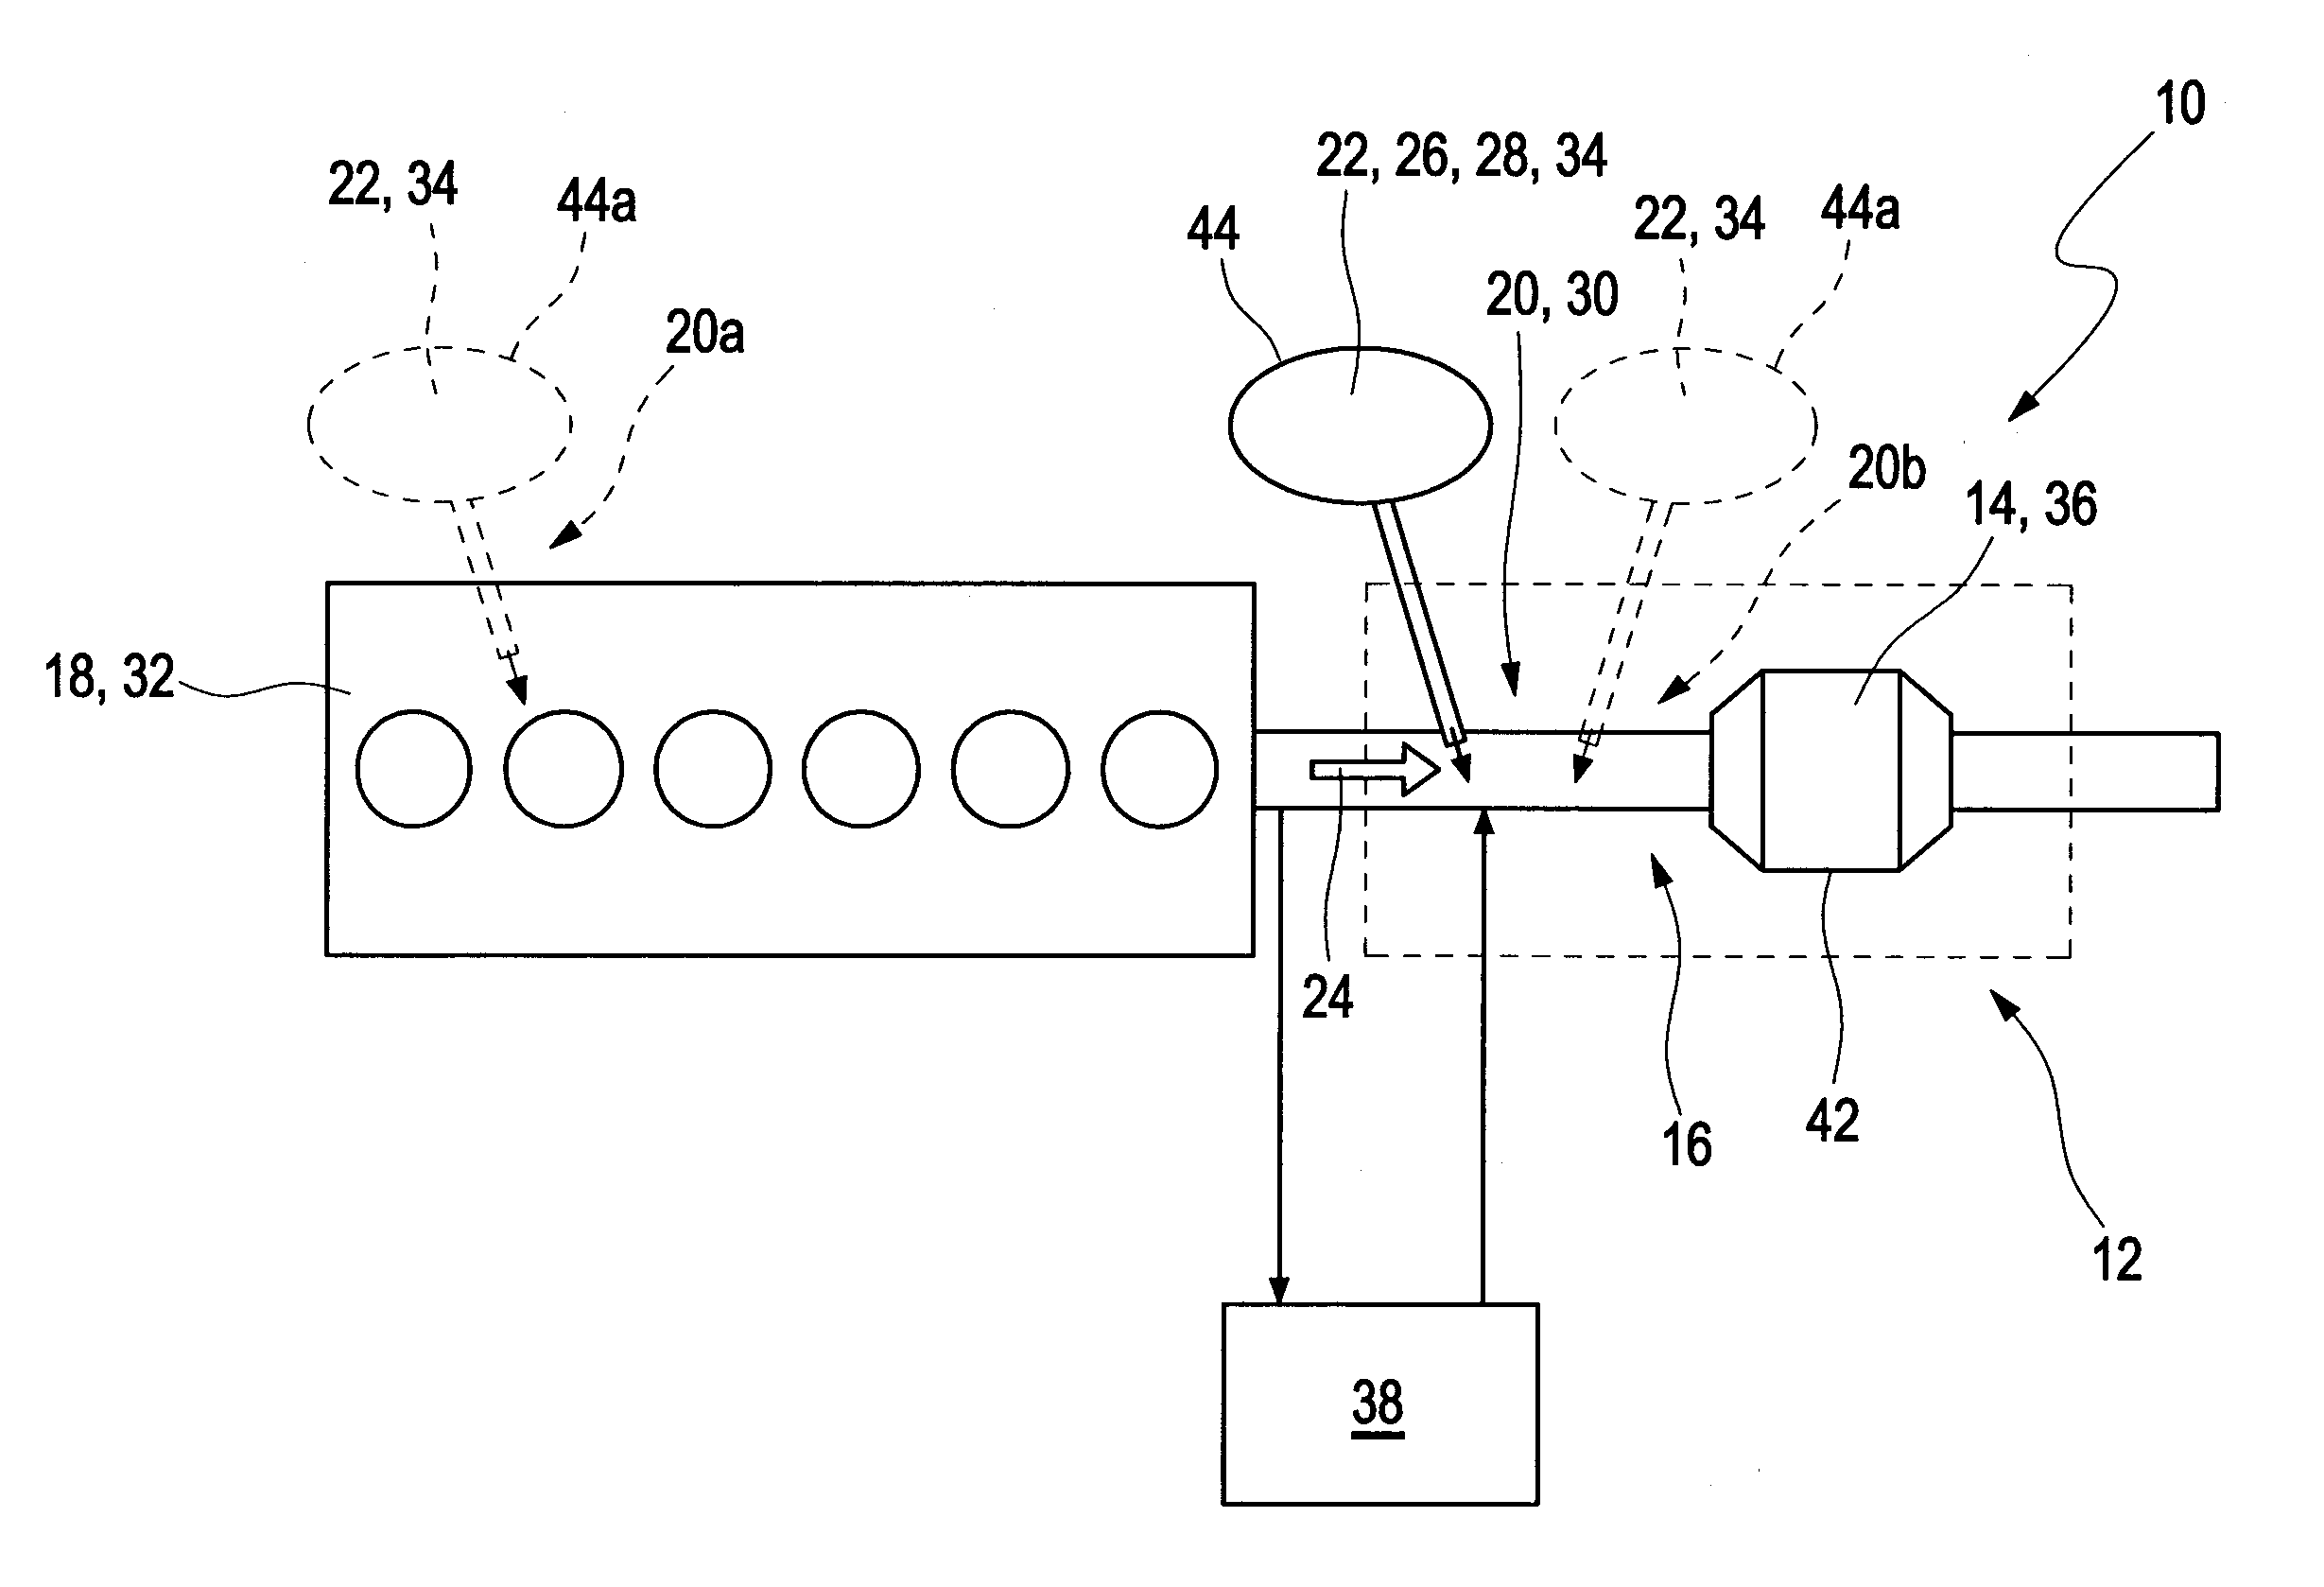 Exhaust aftertreatment system where an activator material is added to the reductant fed to the catalytic converter